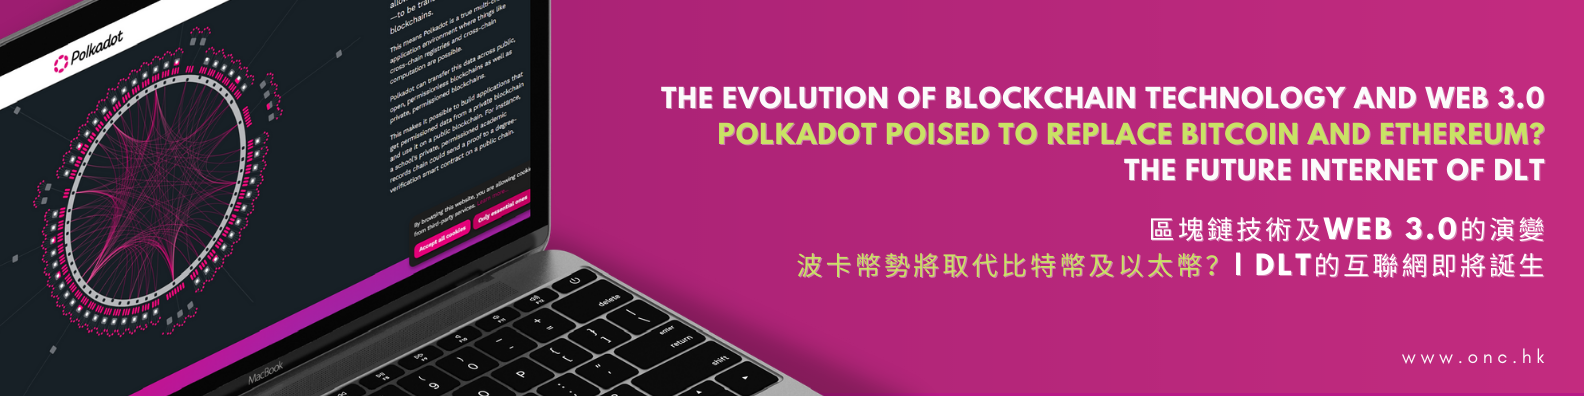 The evolution of Blockchain technology and Web 3.0 | Polkadot poised to replace Bitcoin and Ethereum? | The future internet of DLT